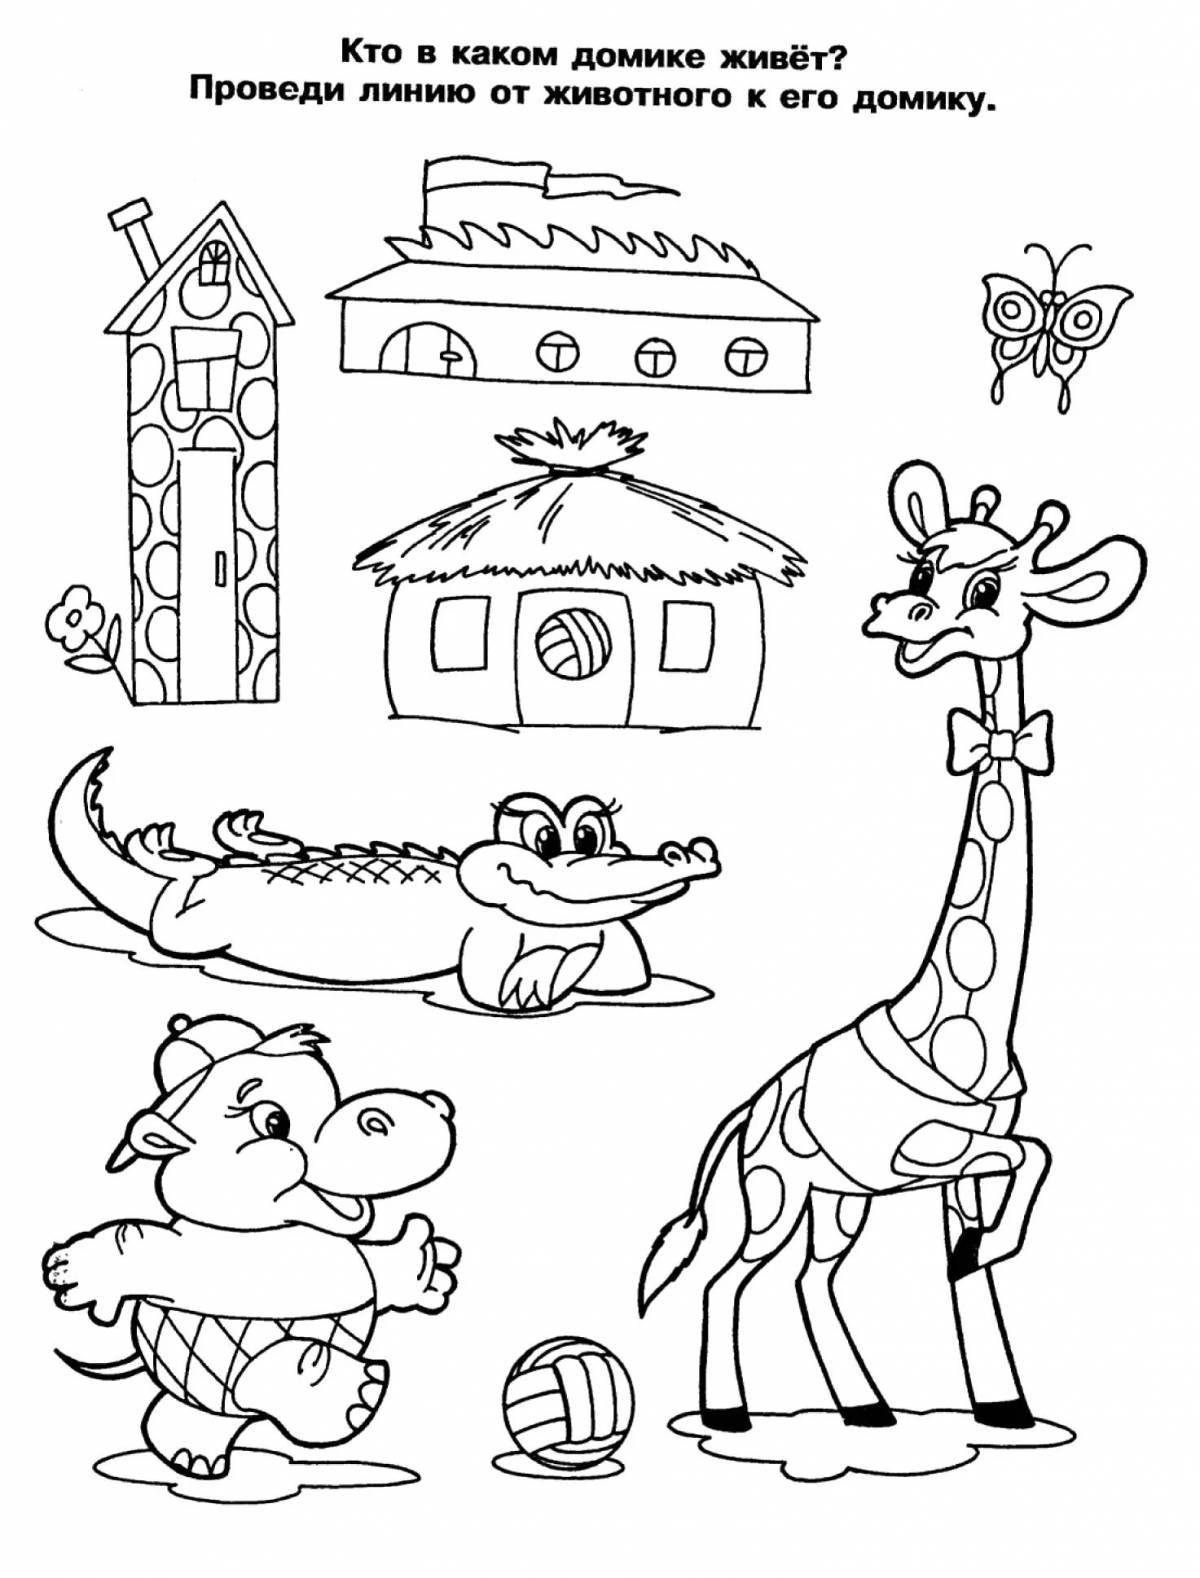 Adorable coloring book for children, educational